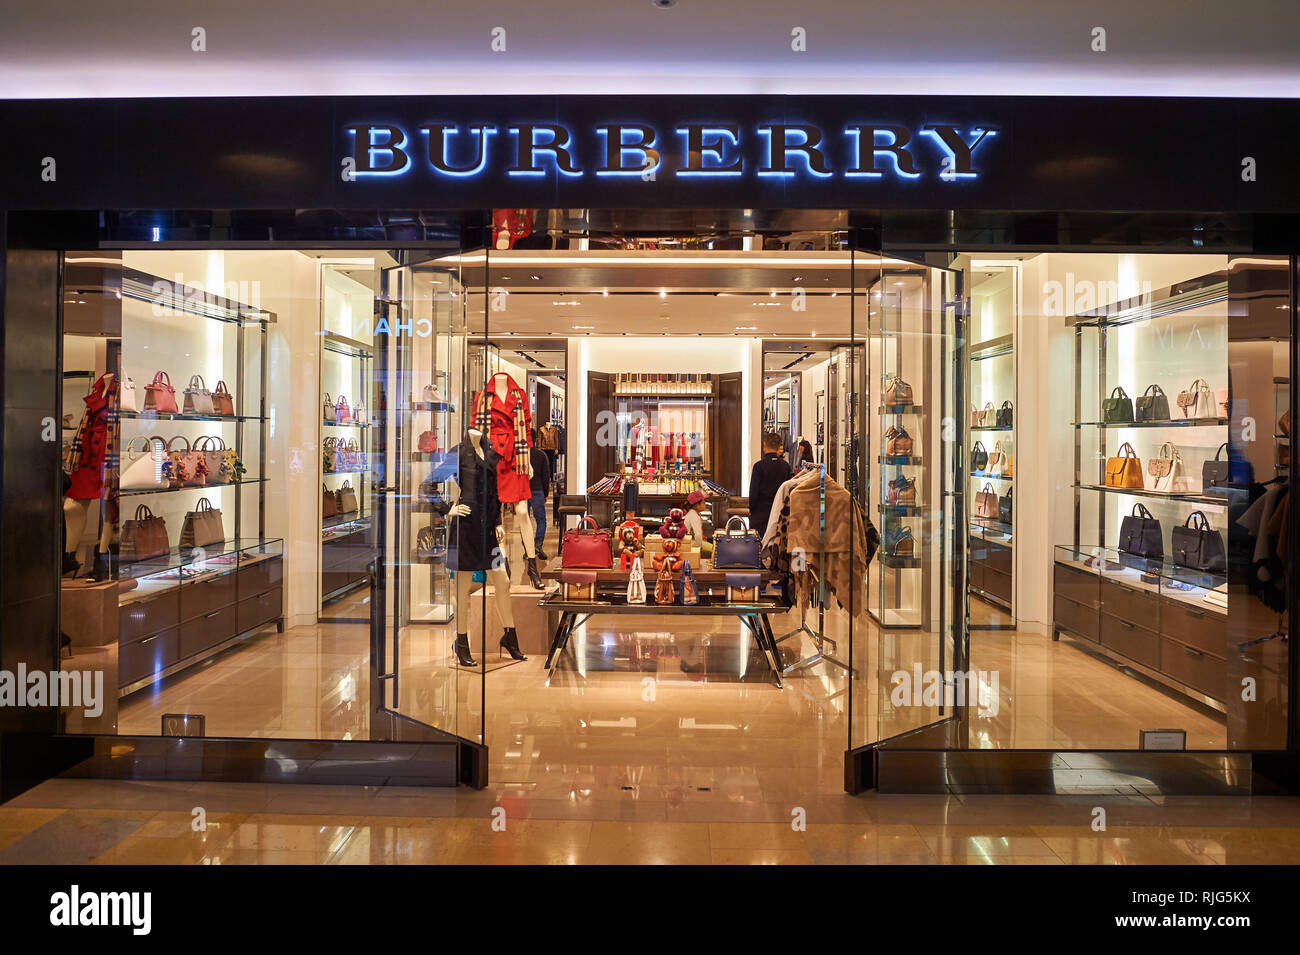 Burberry store at shopping mall 